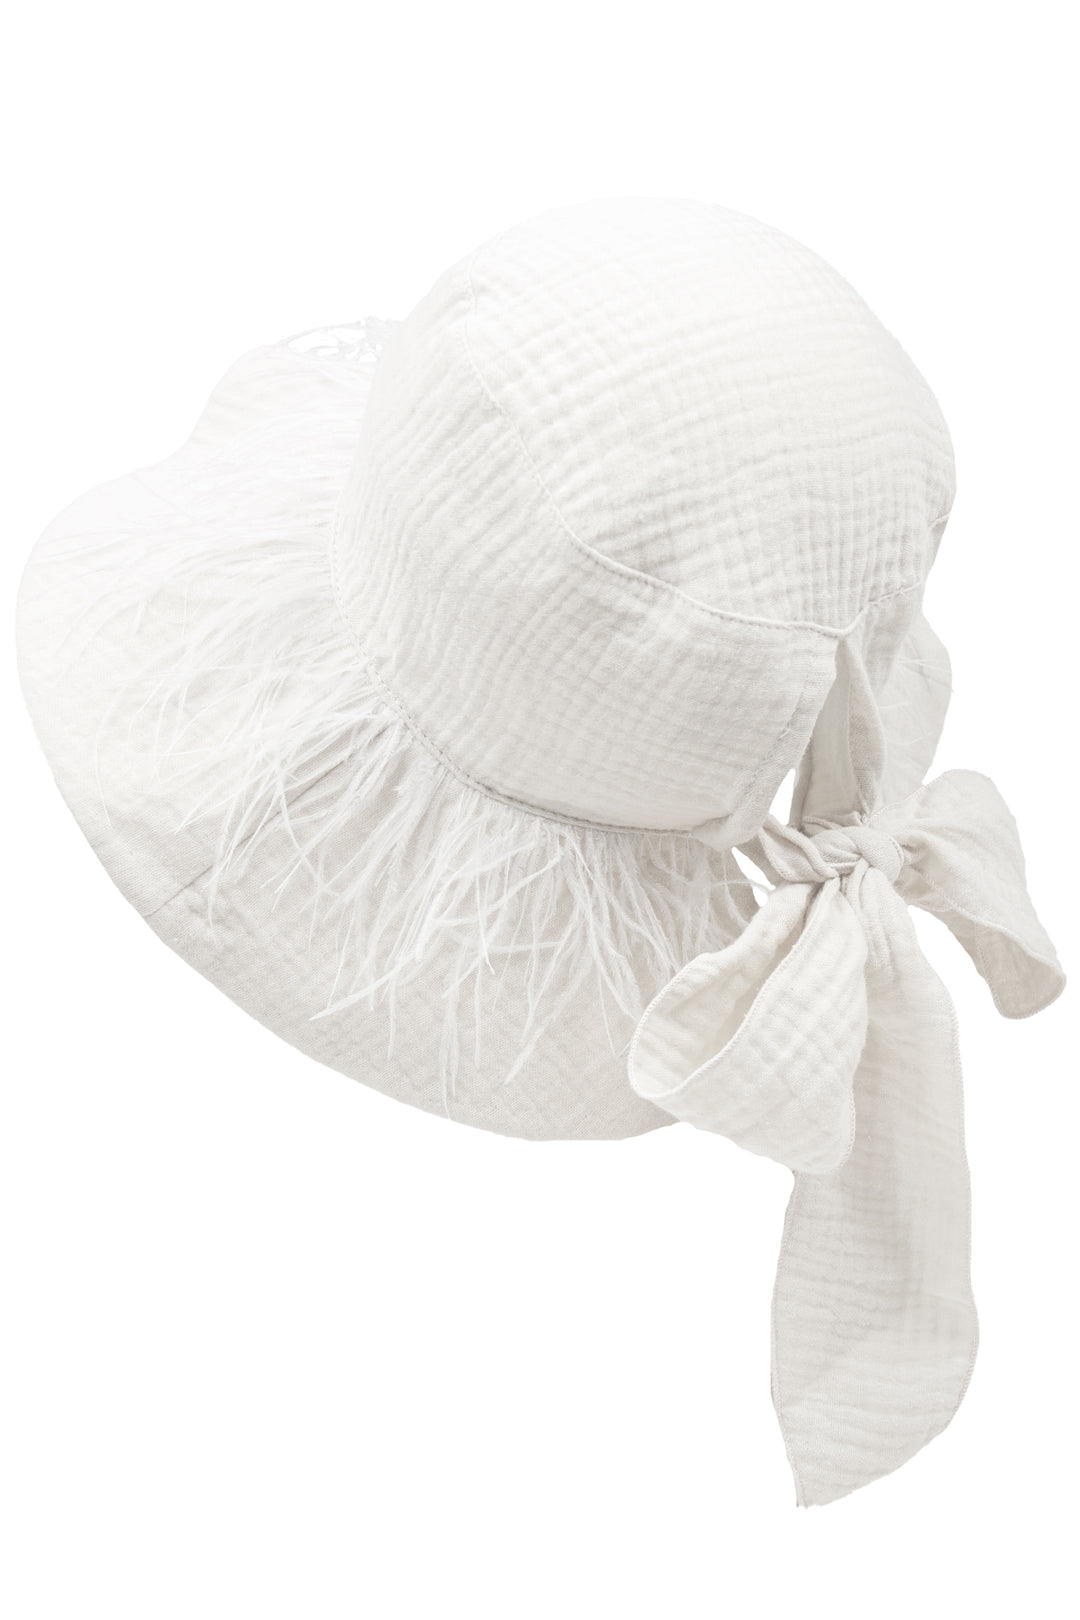 Jamiks "Akali" Ecru Cheesecloth Feather Trim Hat | Millie and John